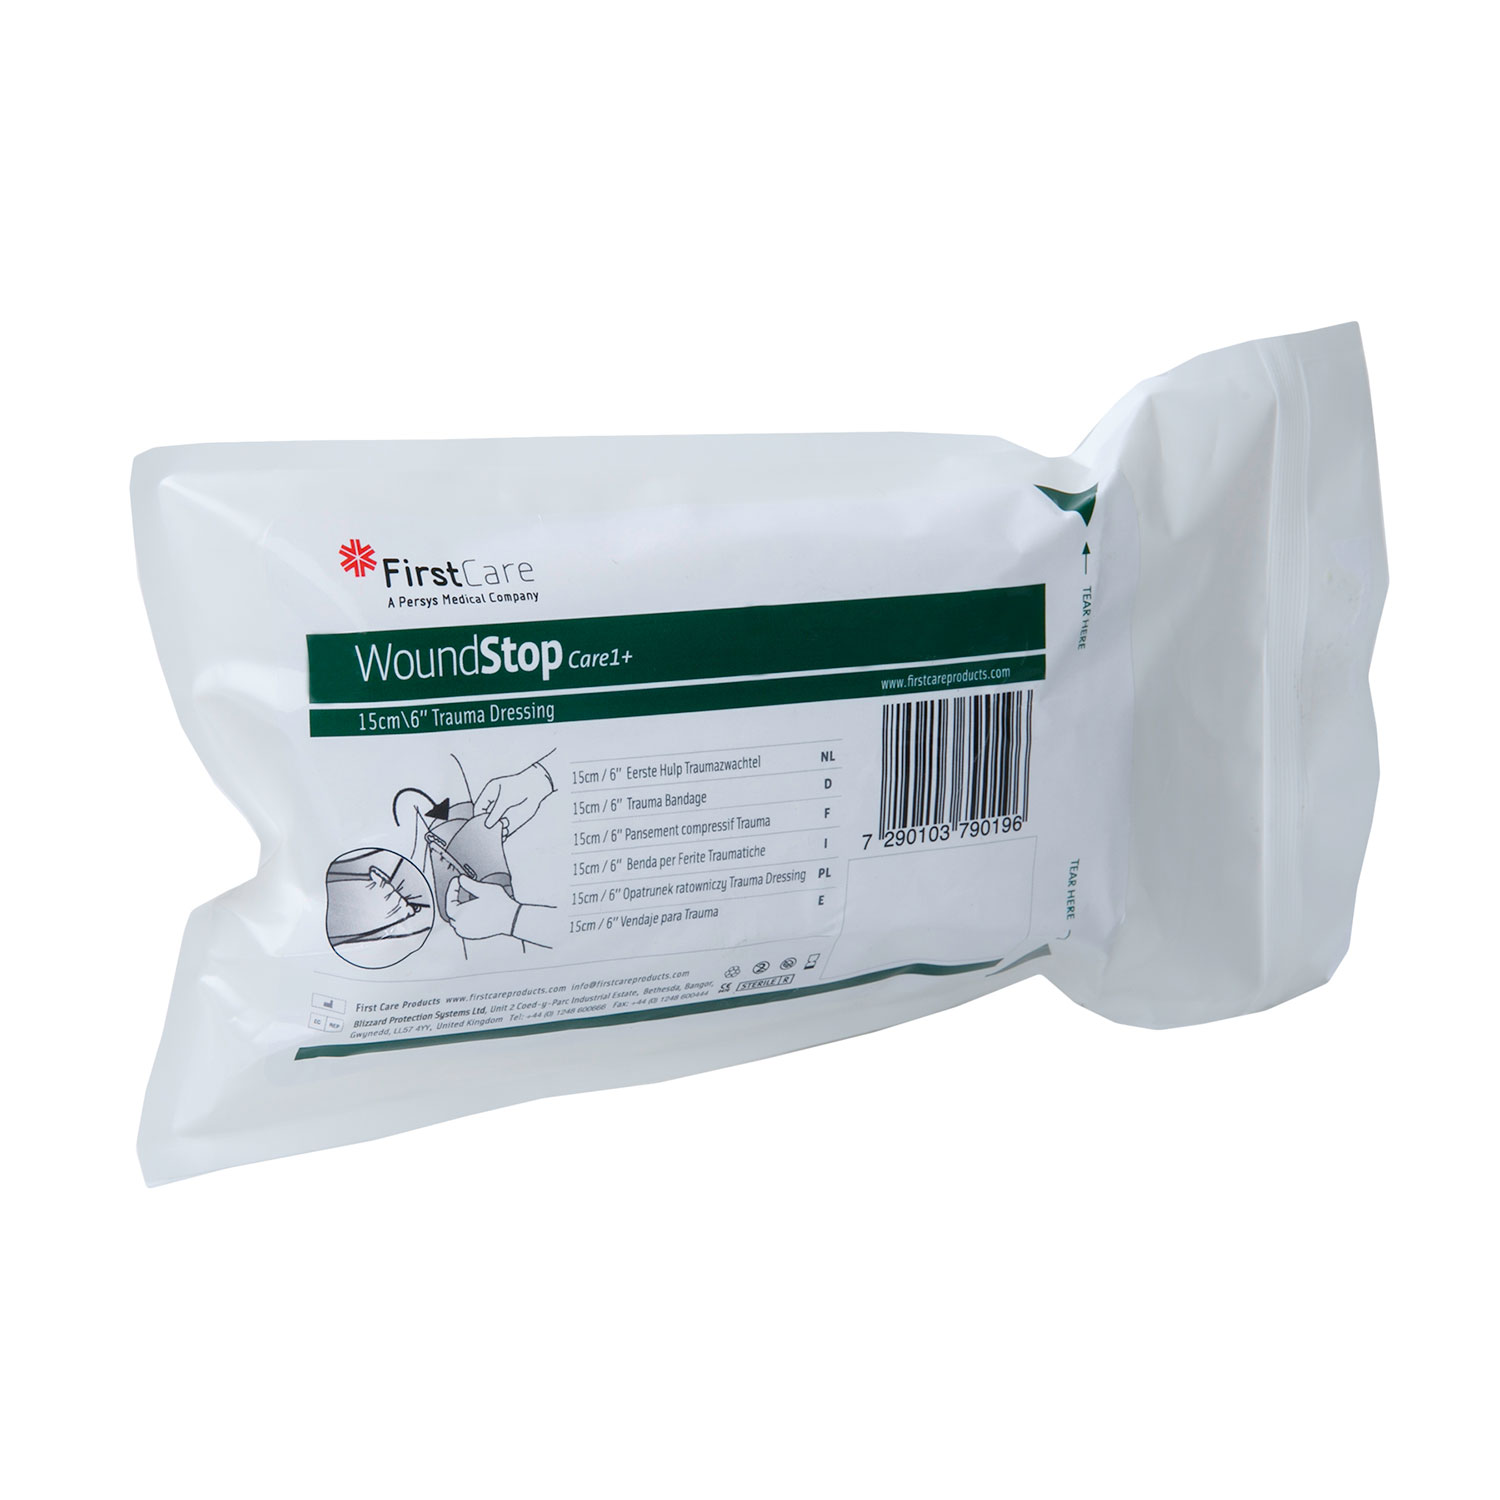 PER-SYS WoundStop Care1+ Dressing (6")